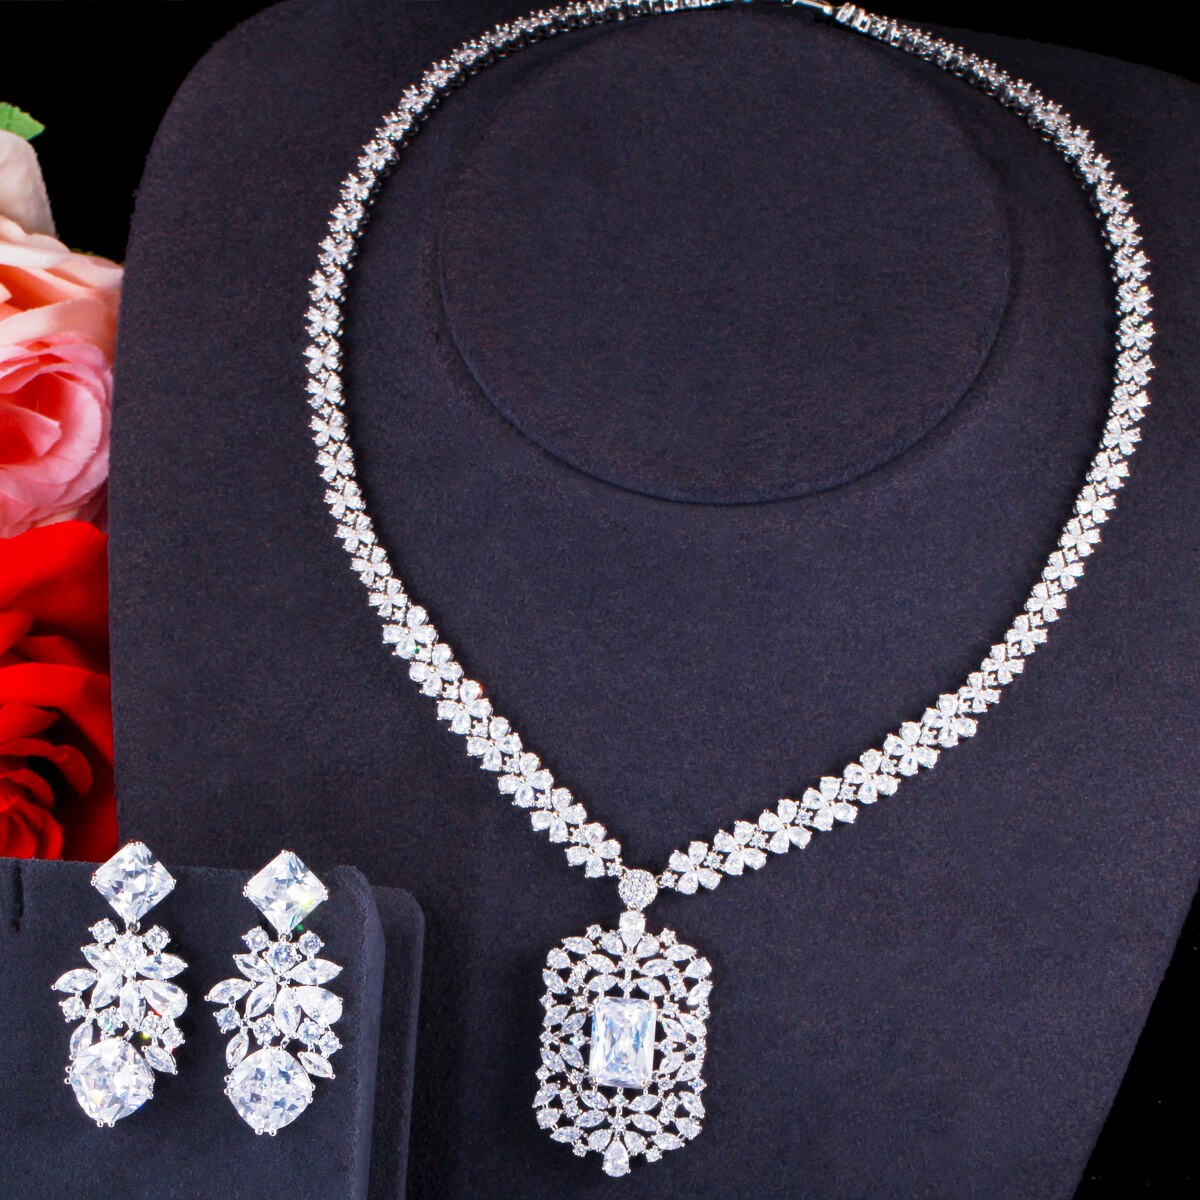 ThreeGraces-Elegant-Yellow-Square-Cubic-Zirconia-Crystal-Silver-Color-Bridal-Wedding-Jewelry-Sets-fo-1005001809304666-12